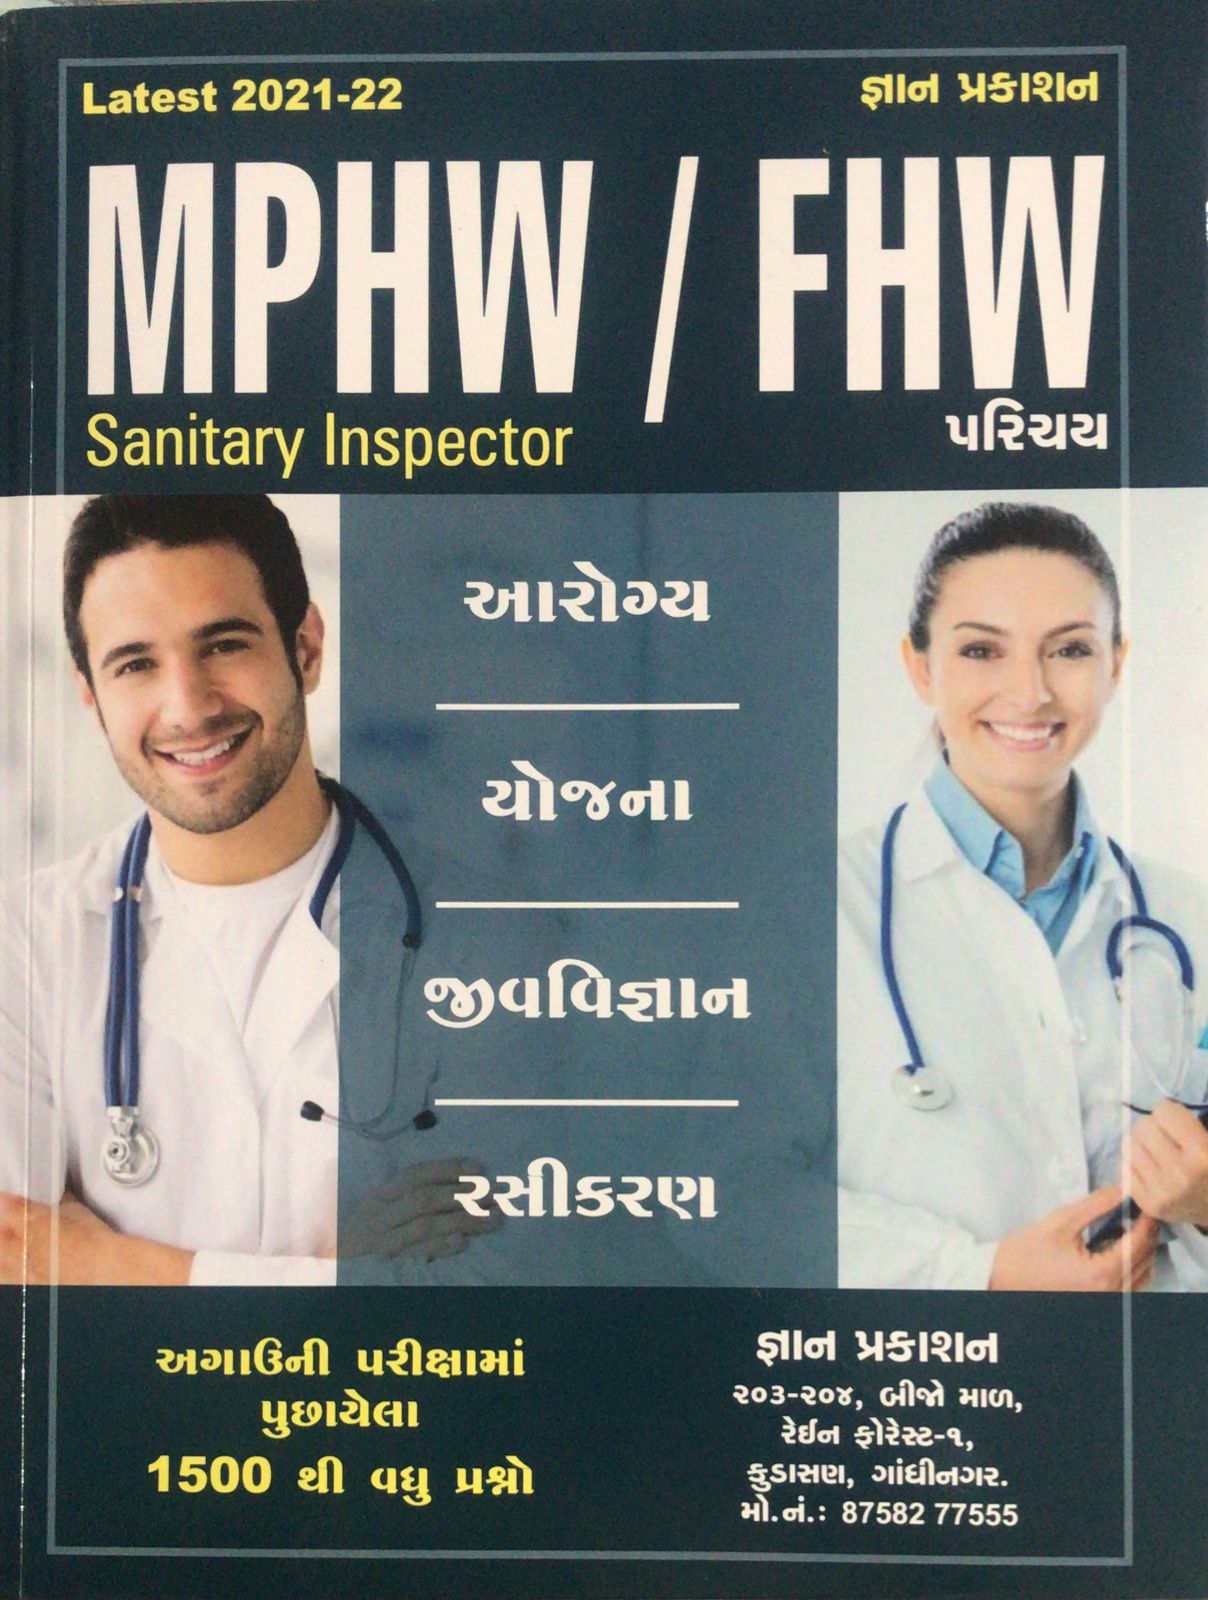 Mphw/fhw 